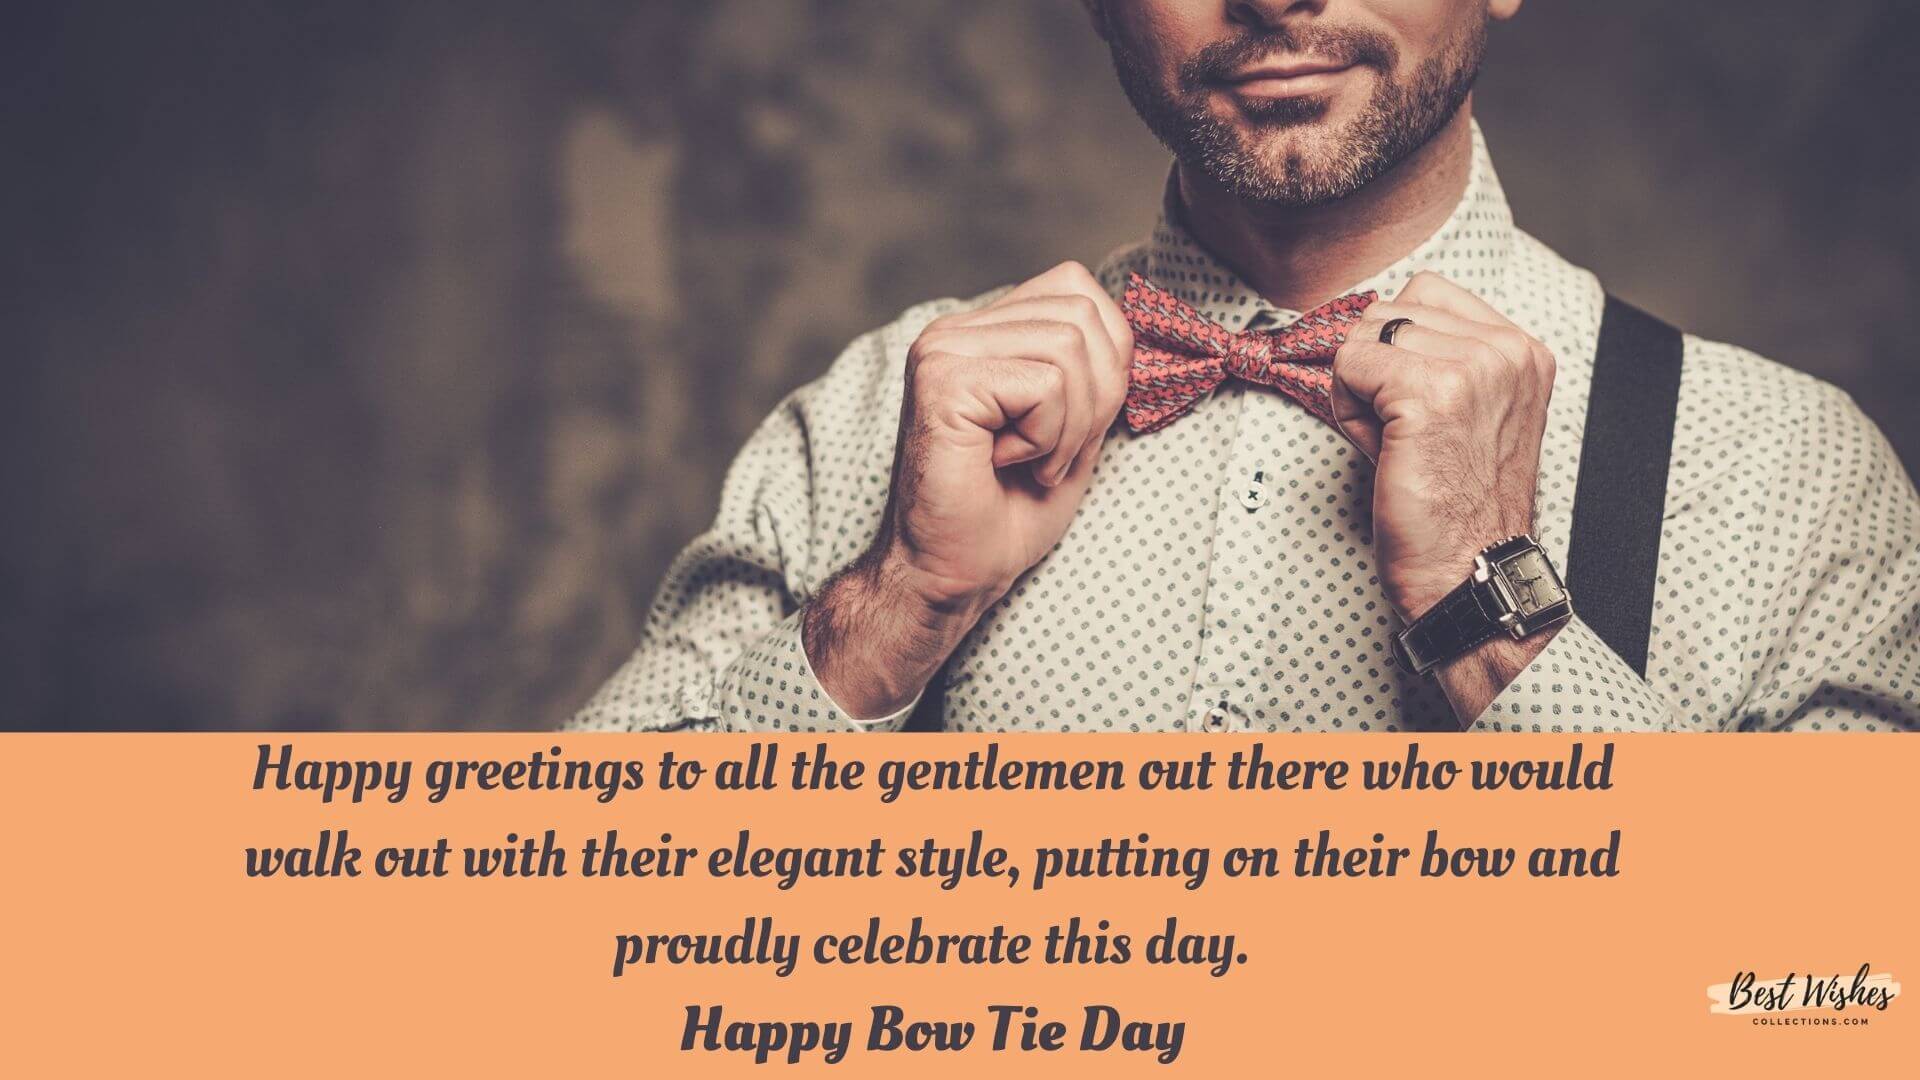 35+Bow Tie Day Greetings, Messages, And Quotes